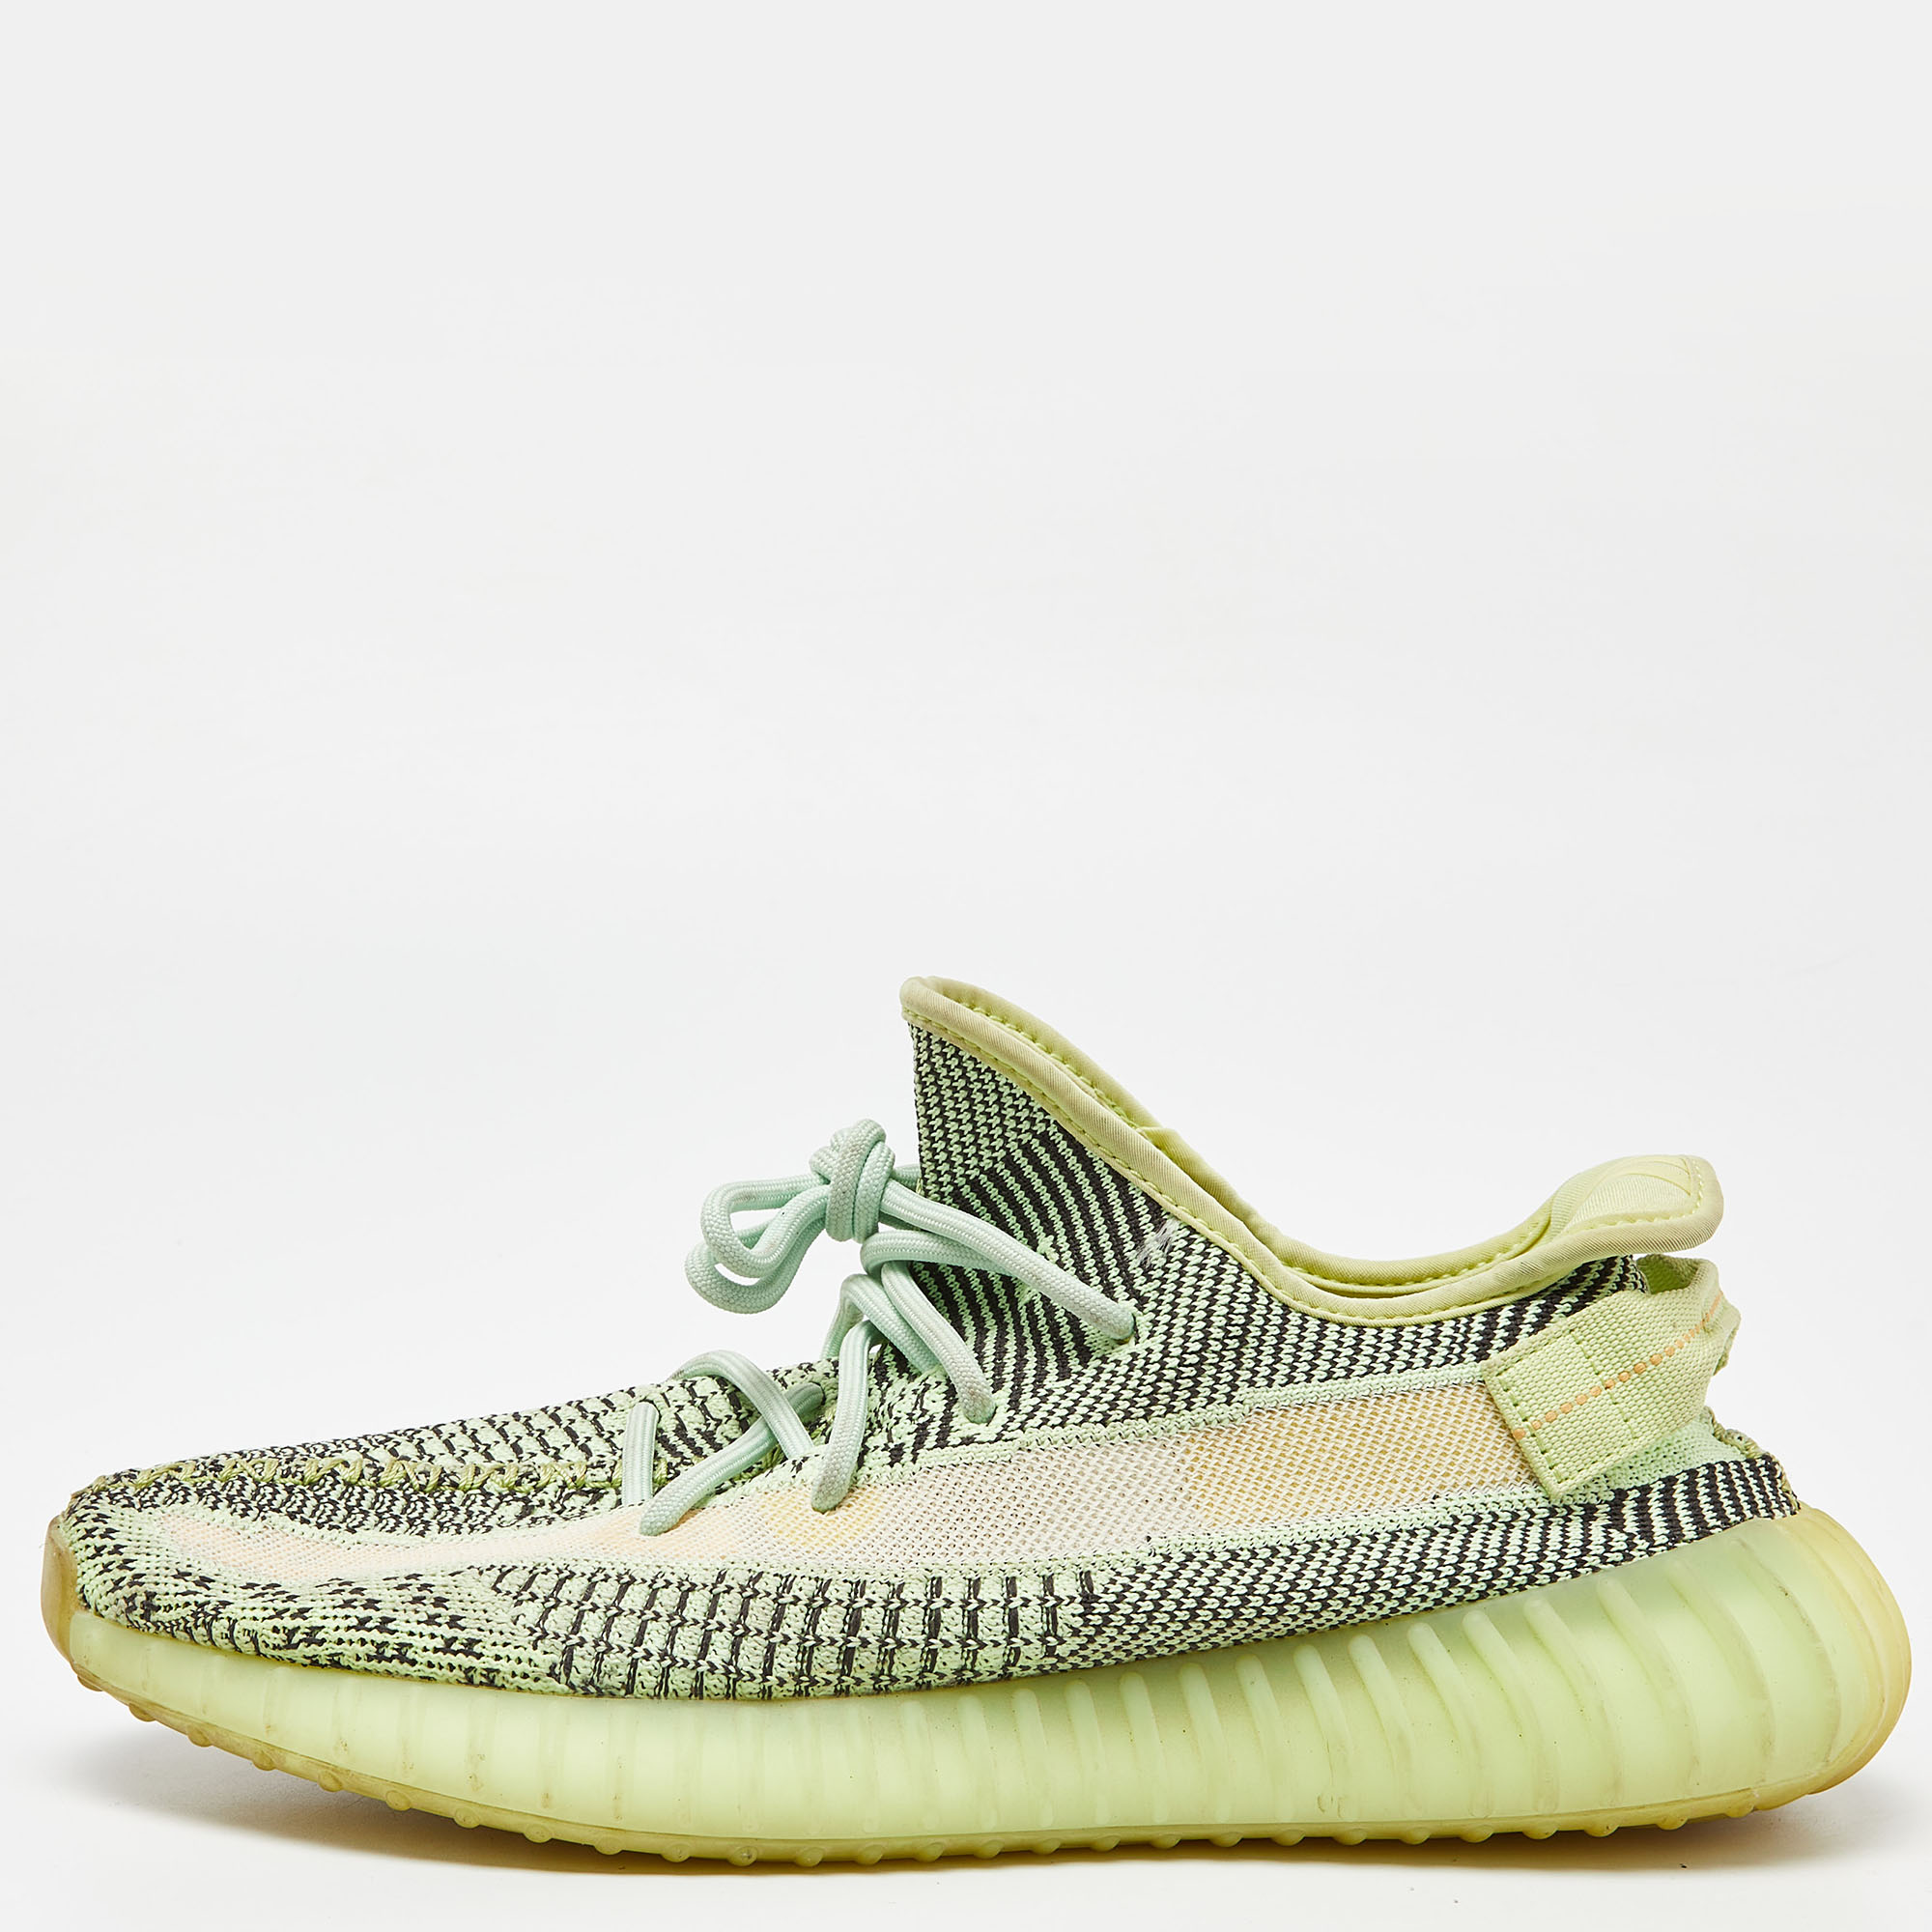 

Yeezy x Adidas Green Knit Fabric Boost 350 V2 Yeezreel Non-Reflective Sneakers Size